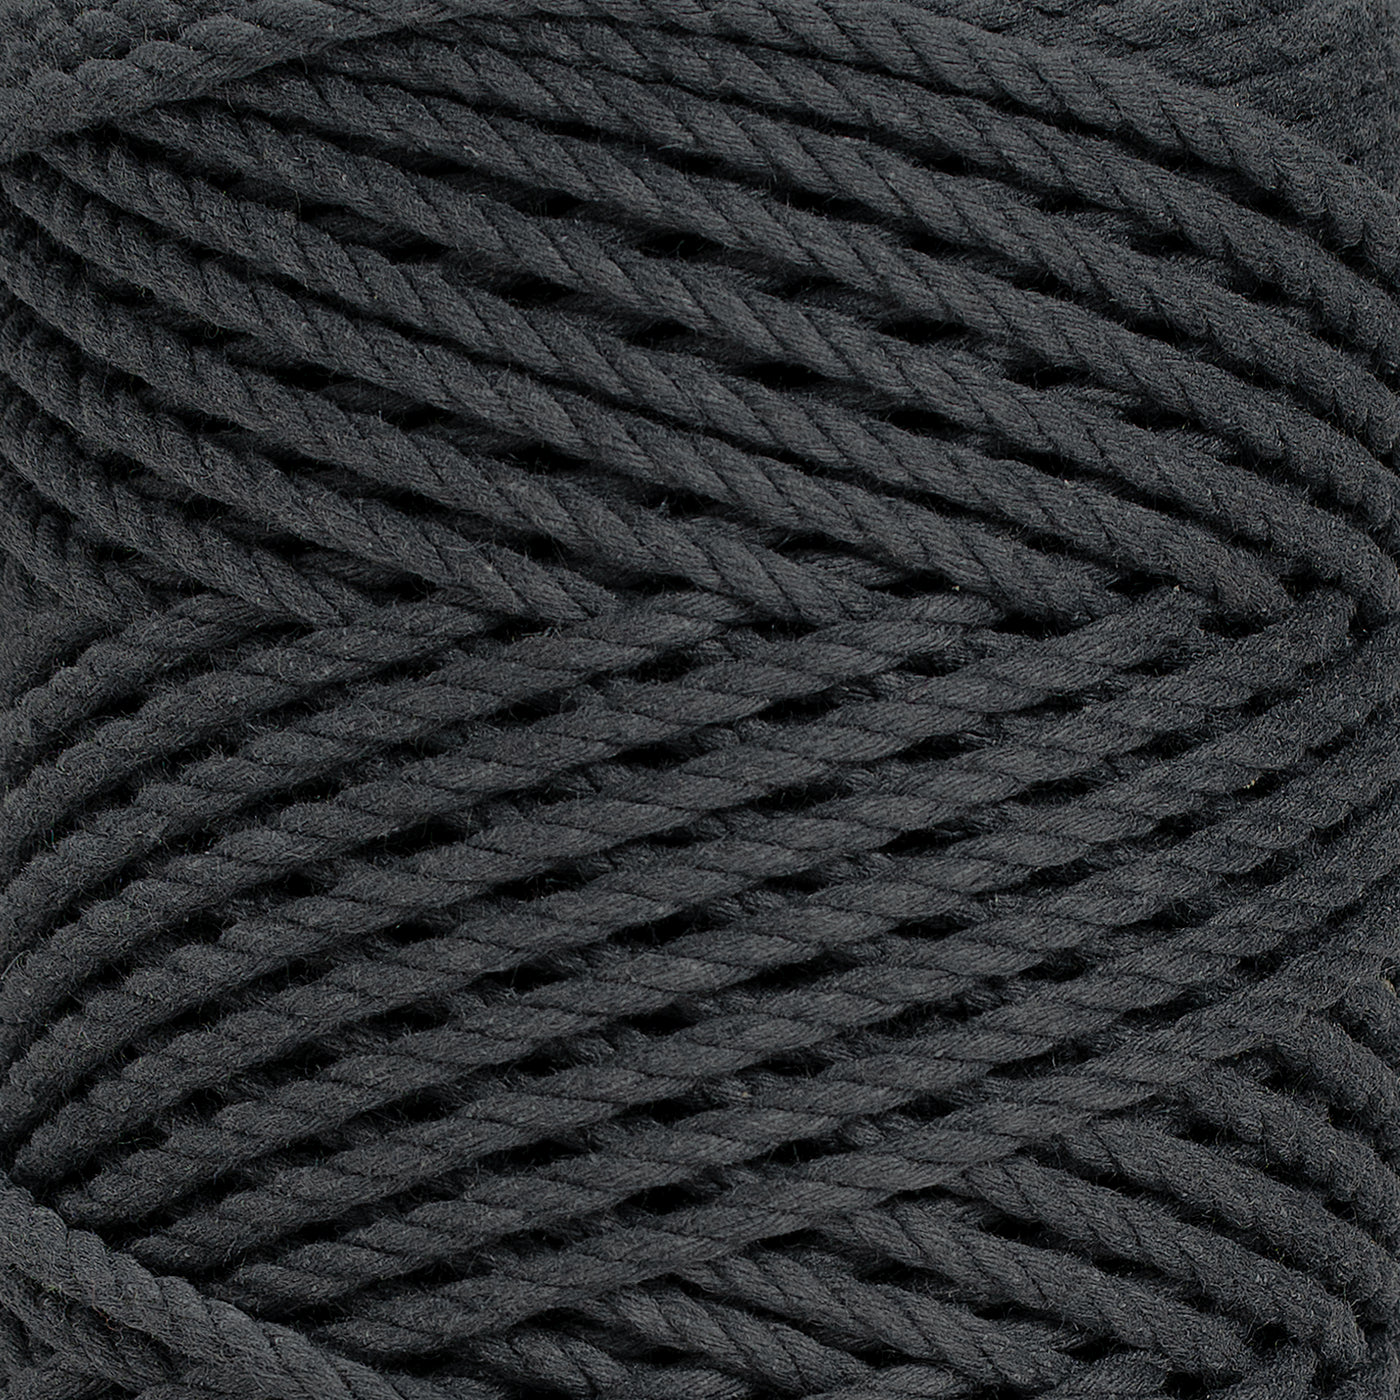 COTTON ROPE ZERO WASTE 3 MM - 3 PLY - ANTHRACITE GRAY COLOR